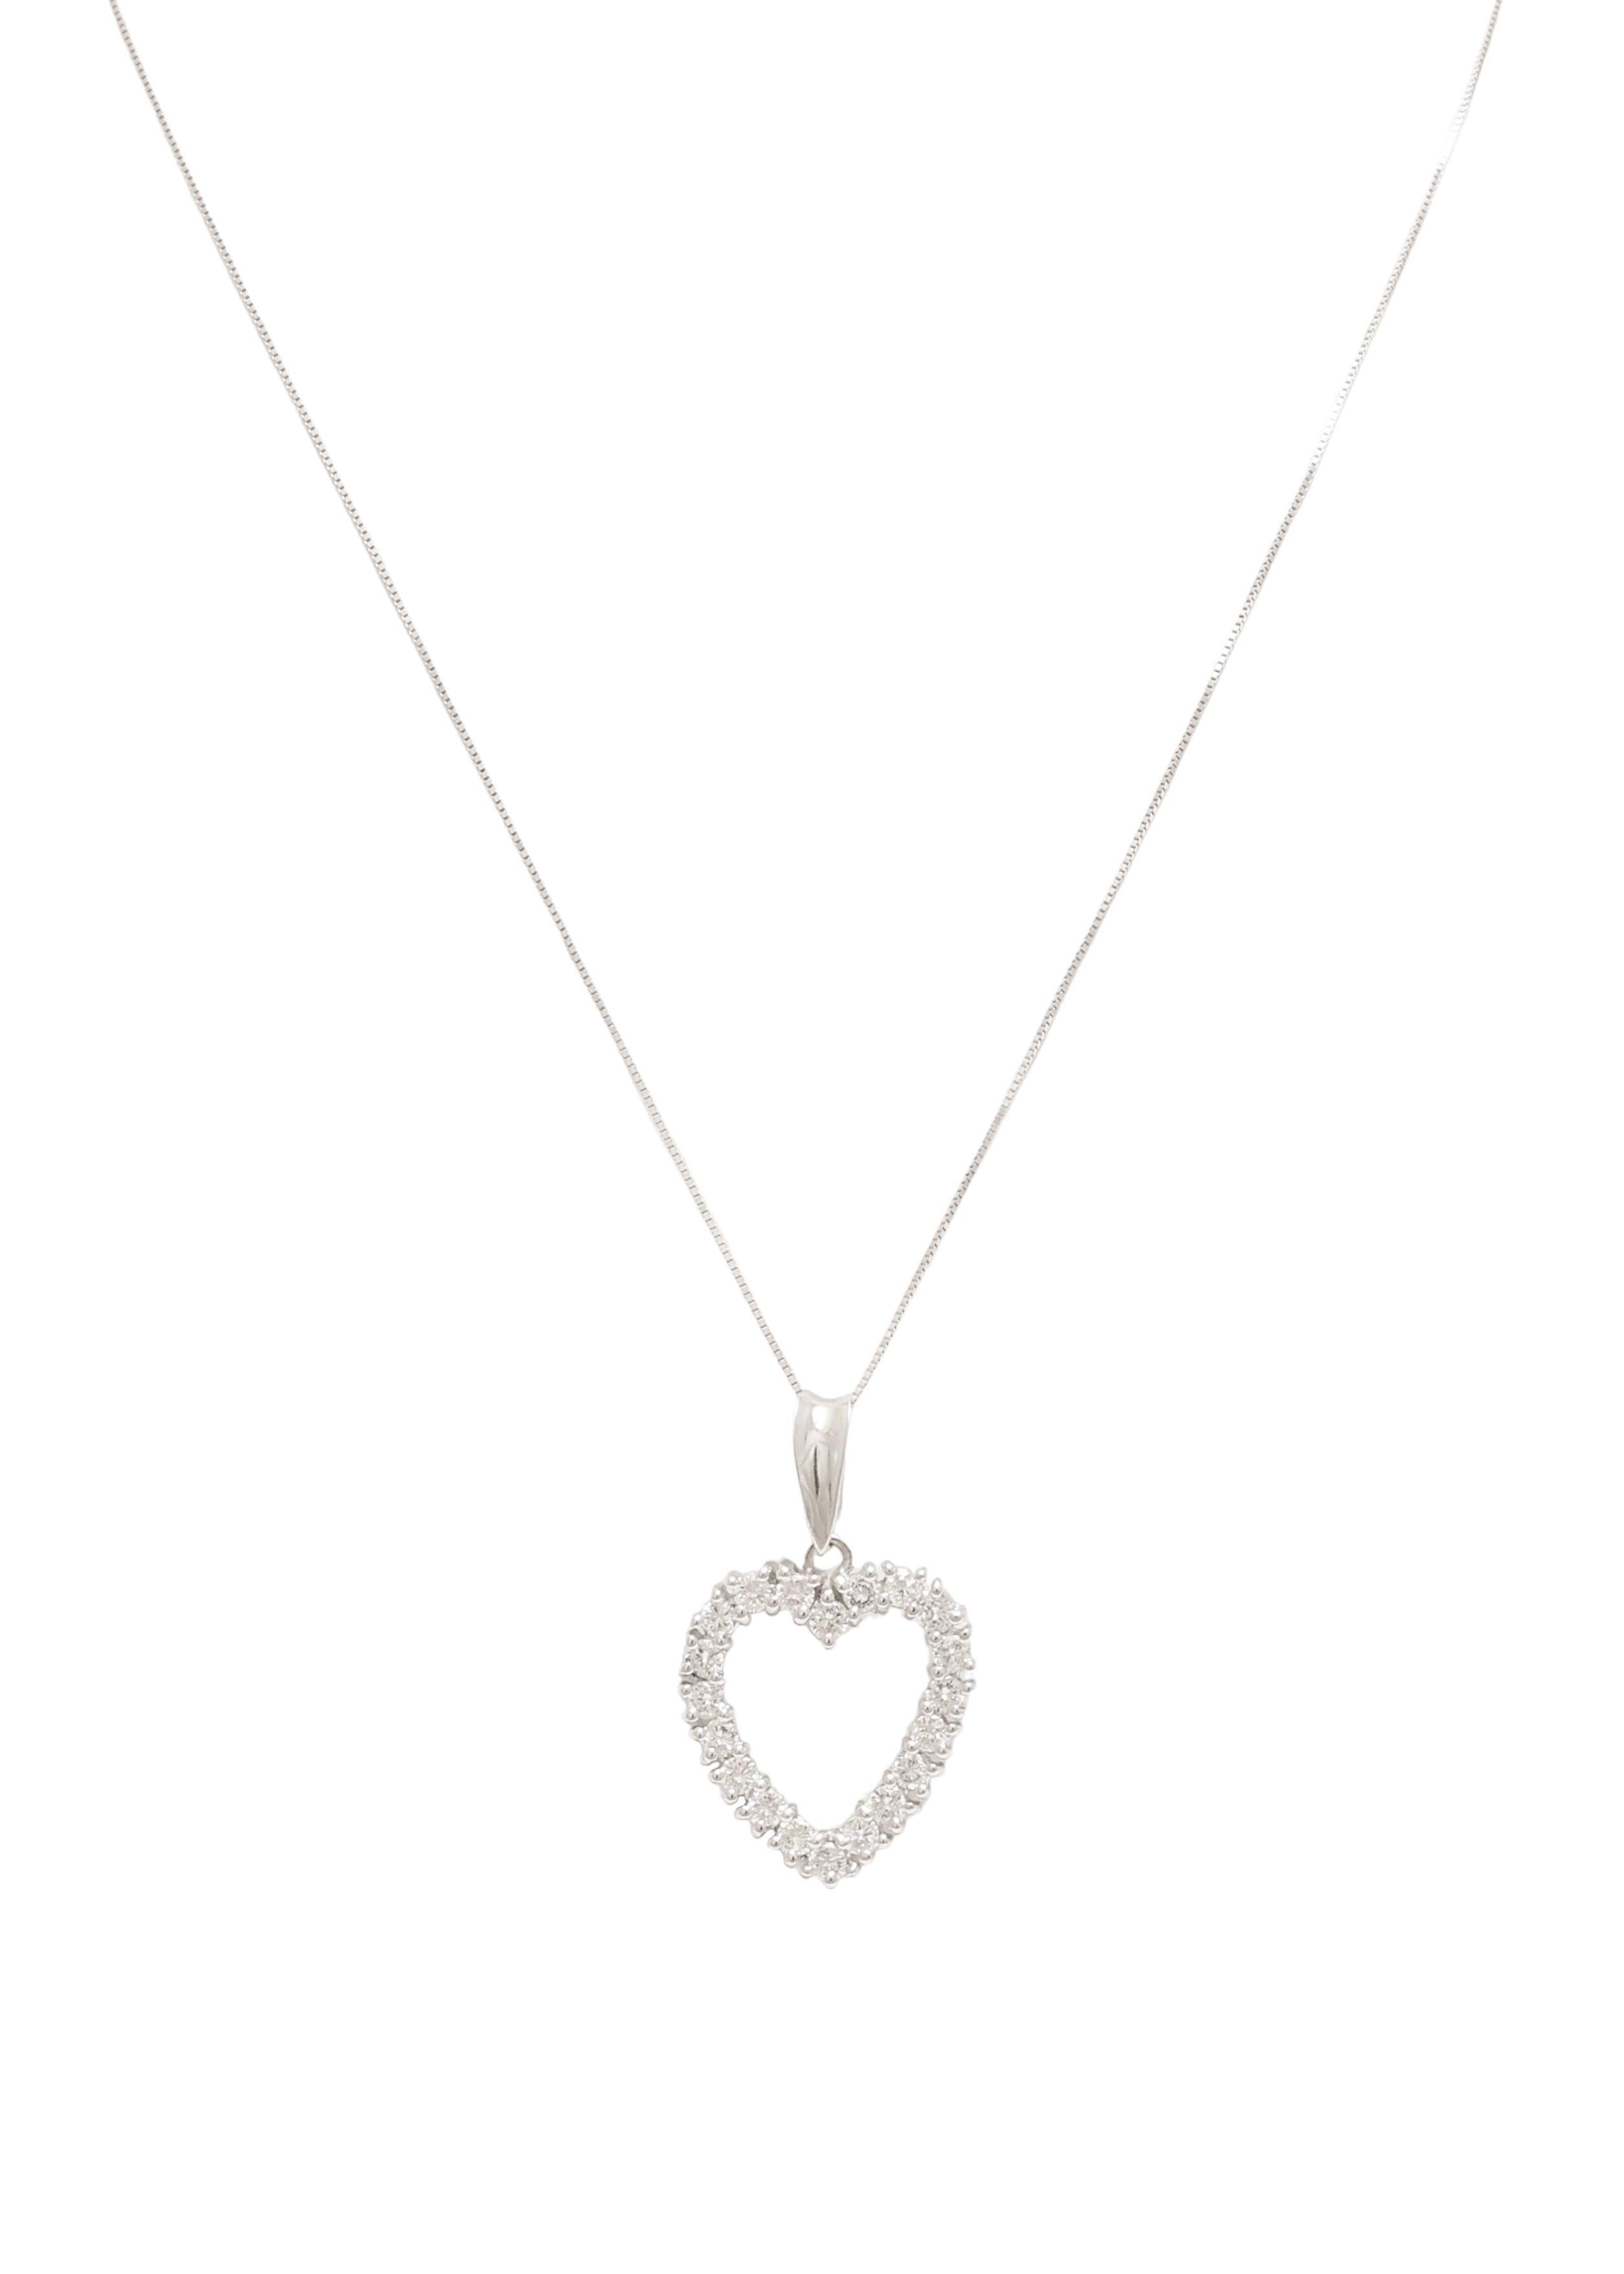 18 kt. White Gold Heart Pendant Necklace with 0.80 ct. Diamonds For Sale 1